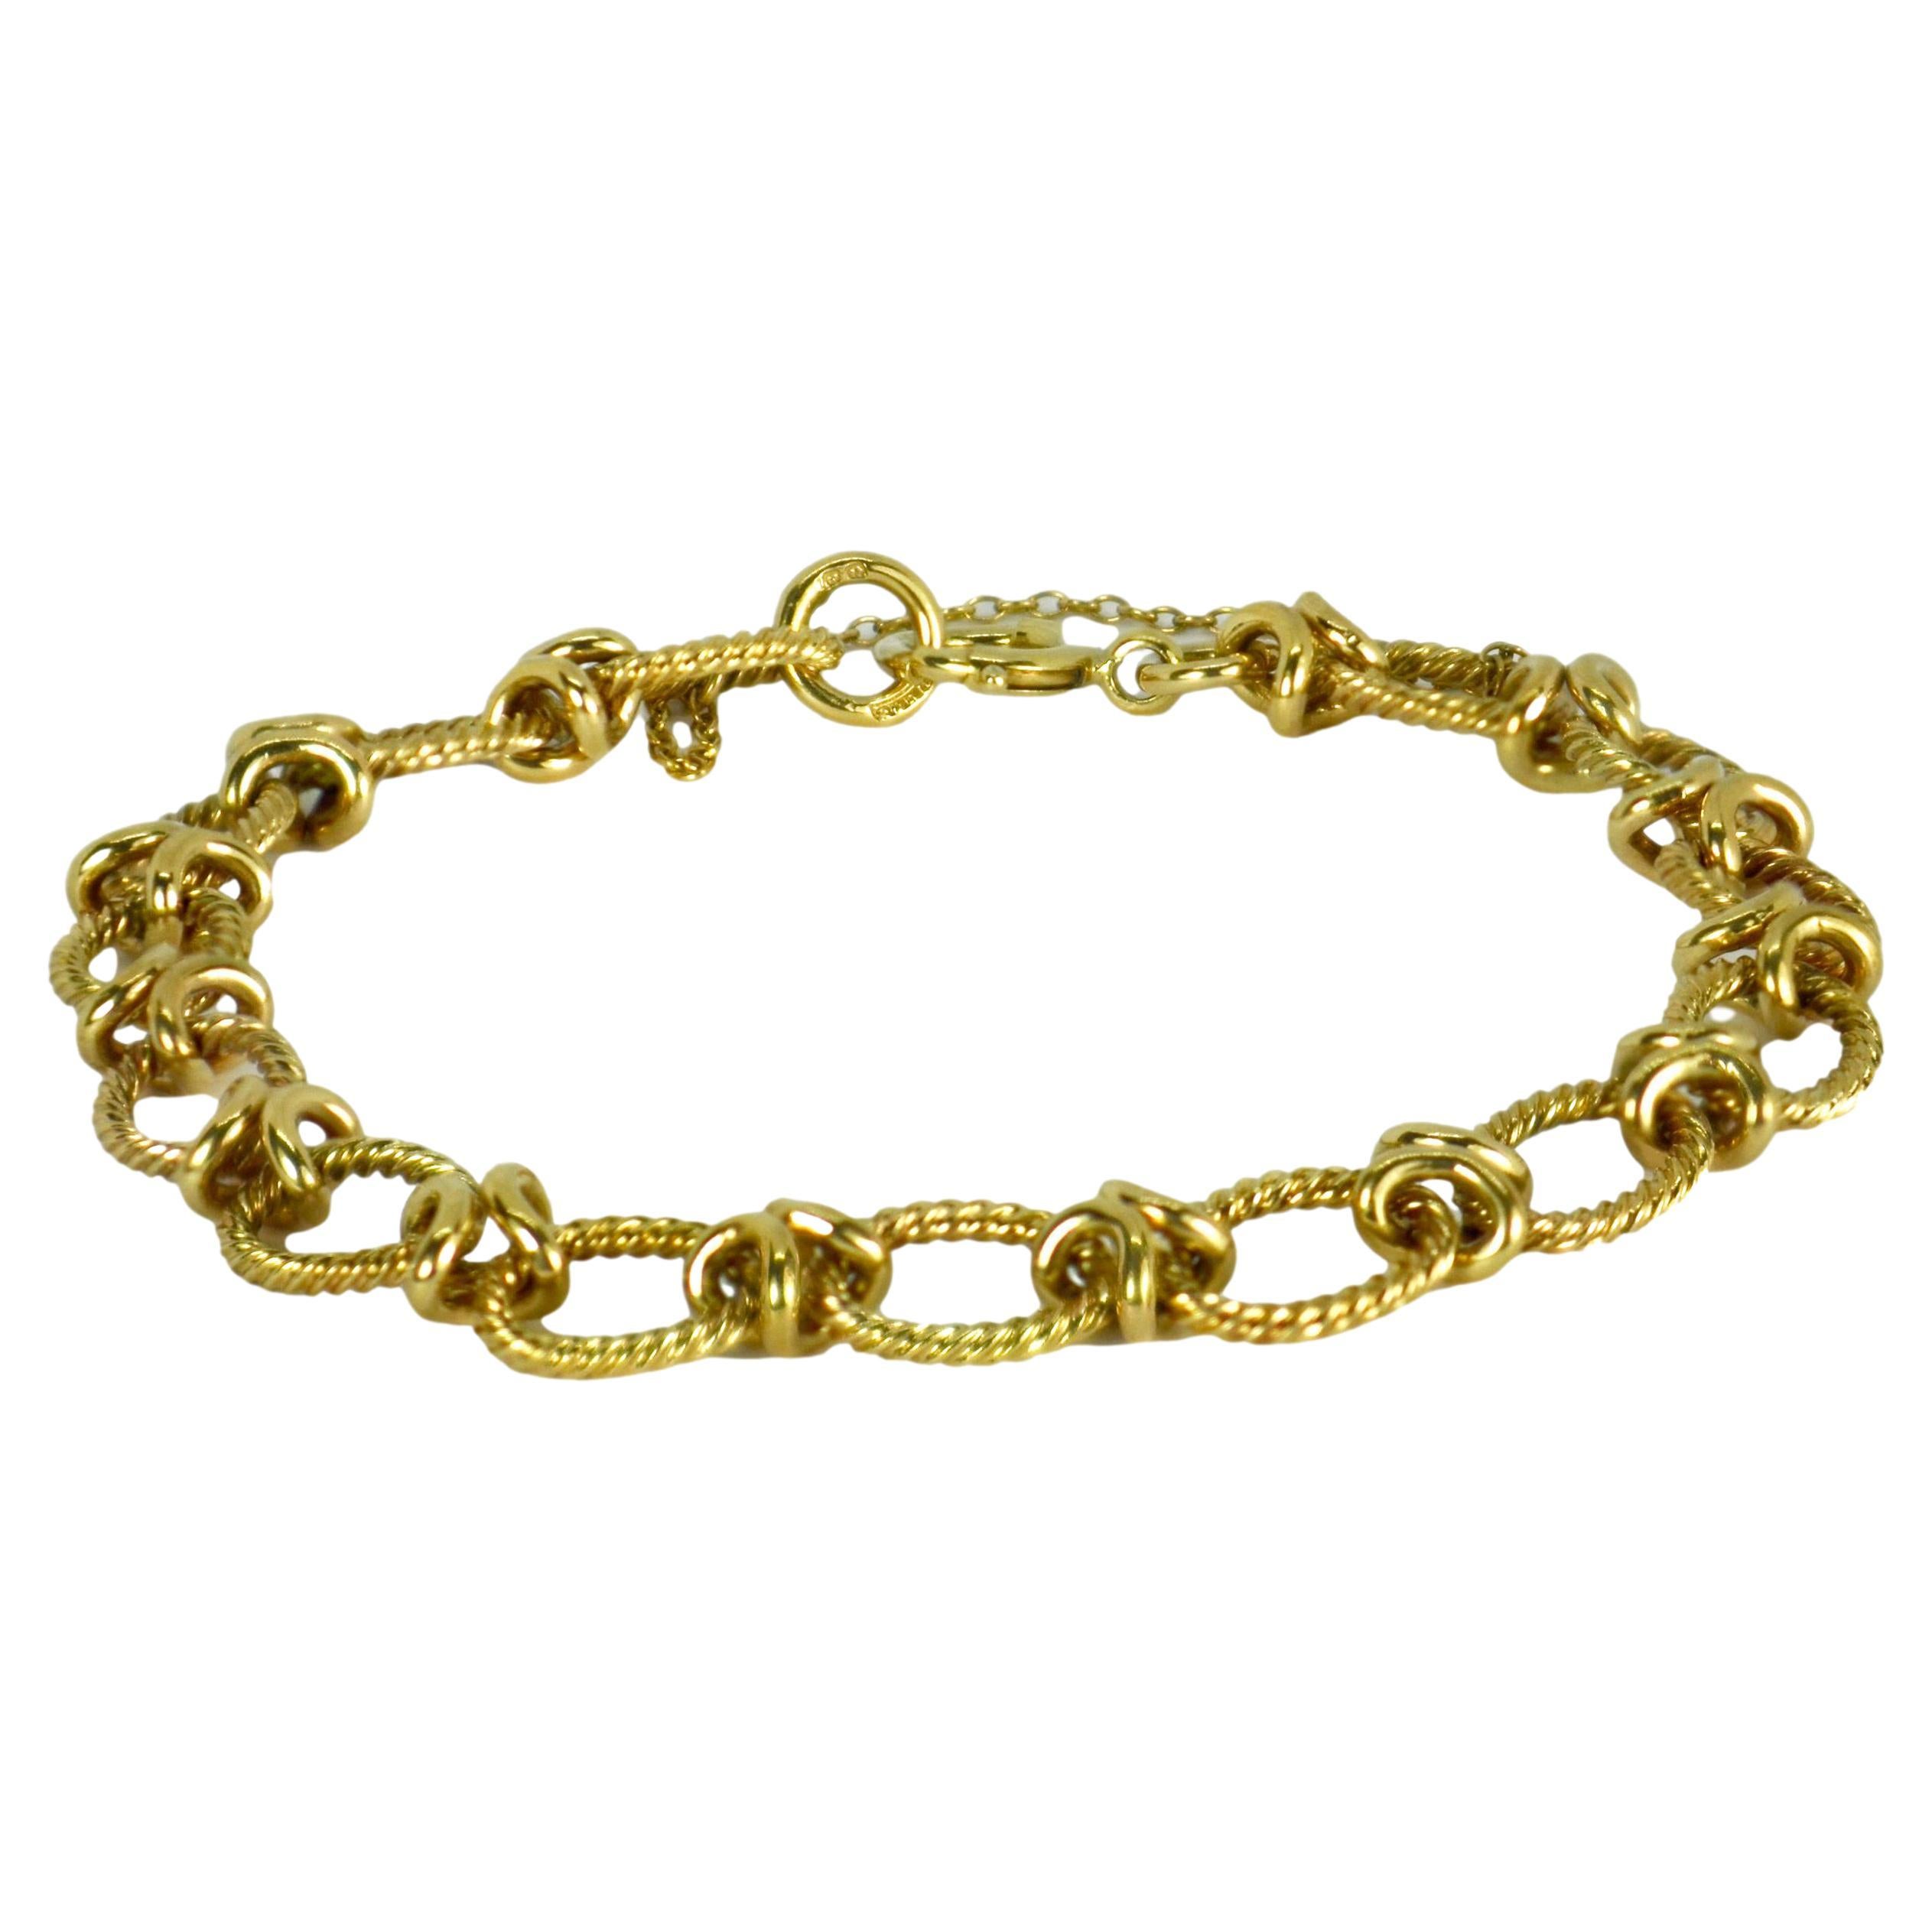 FOR CYNTHIA 9K Yellow Gold Twisted Fancy Oval Link Bracelet